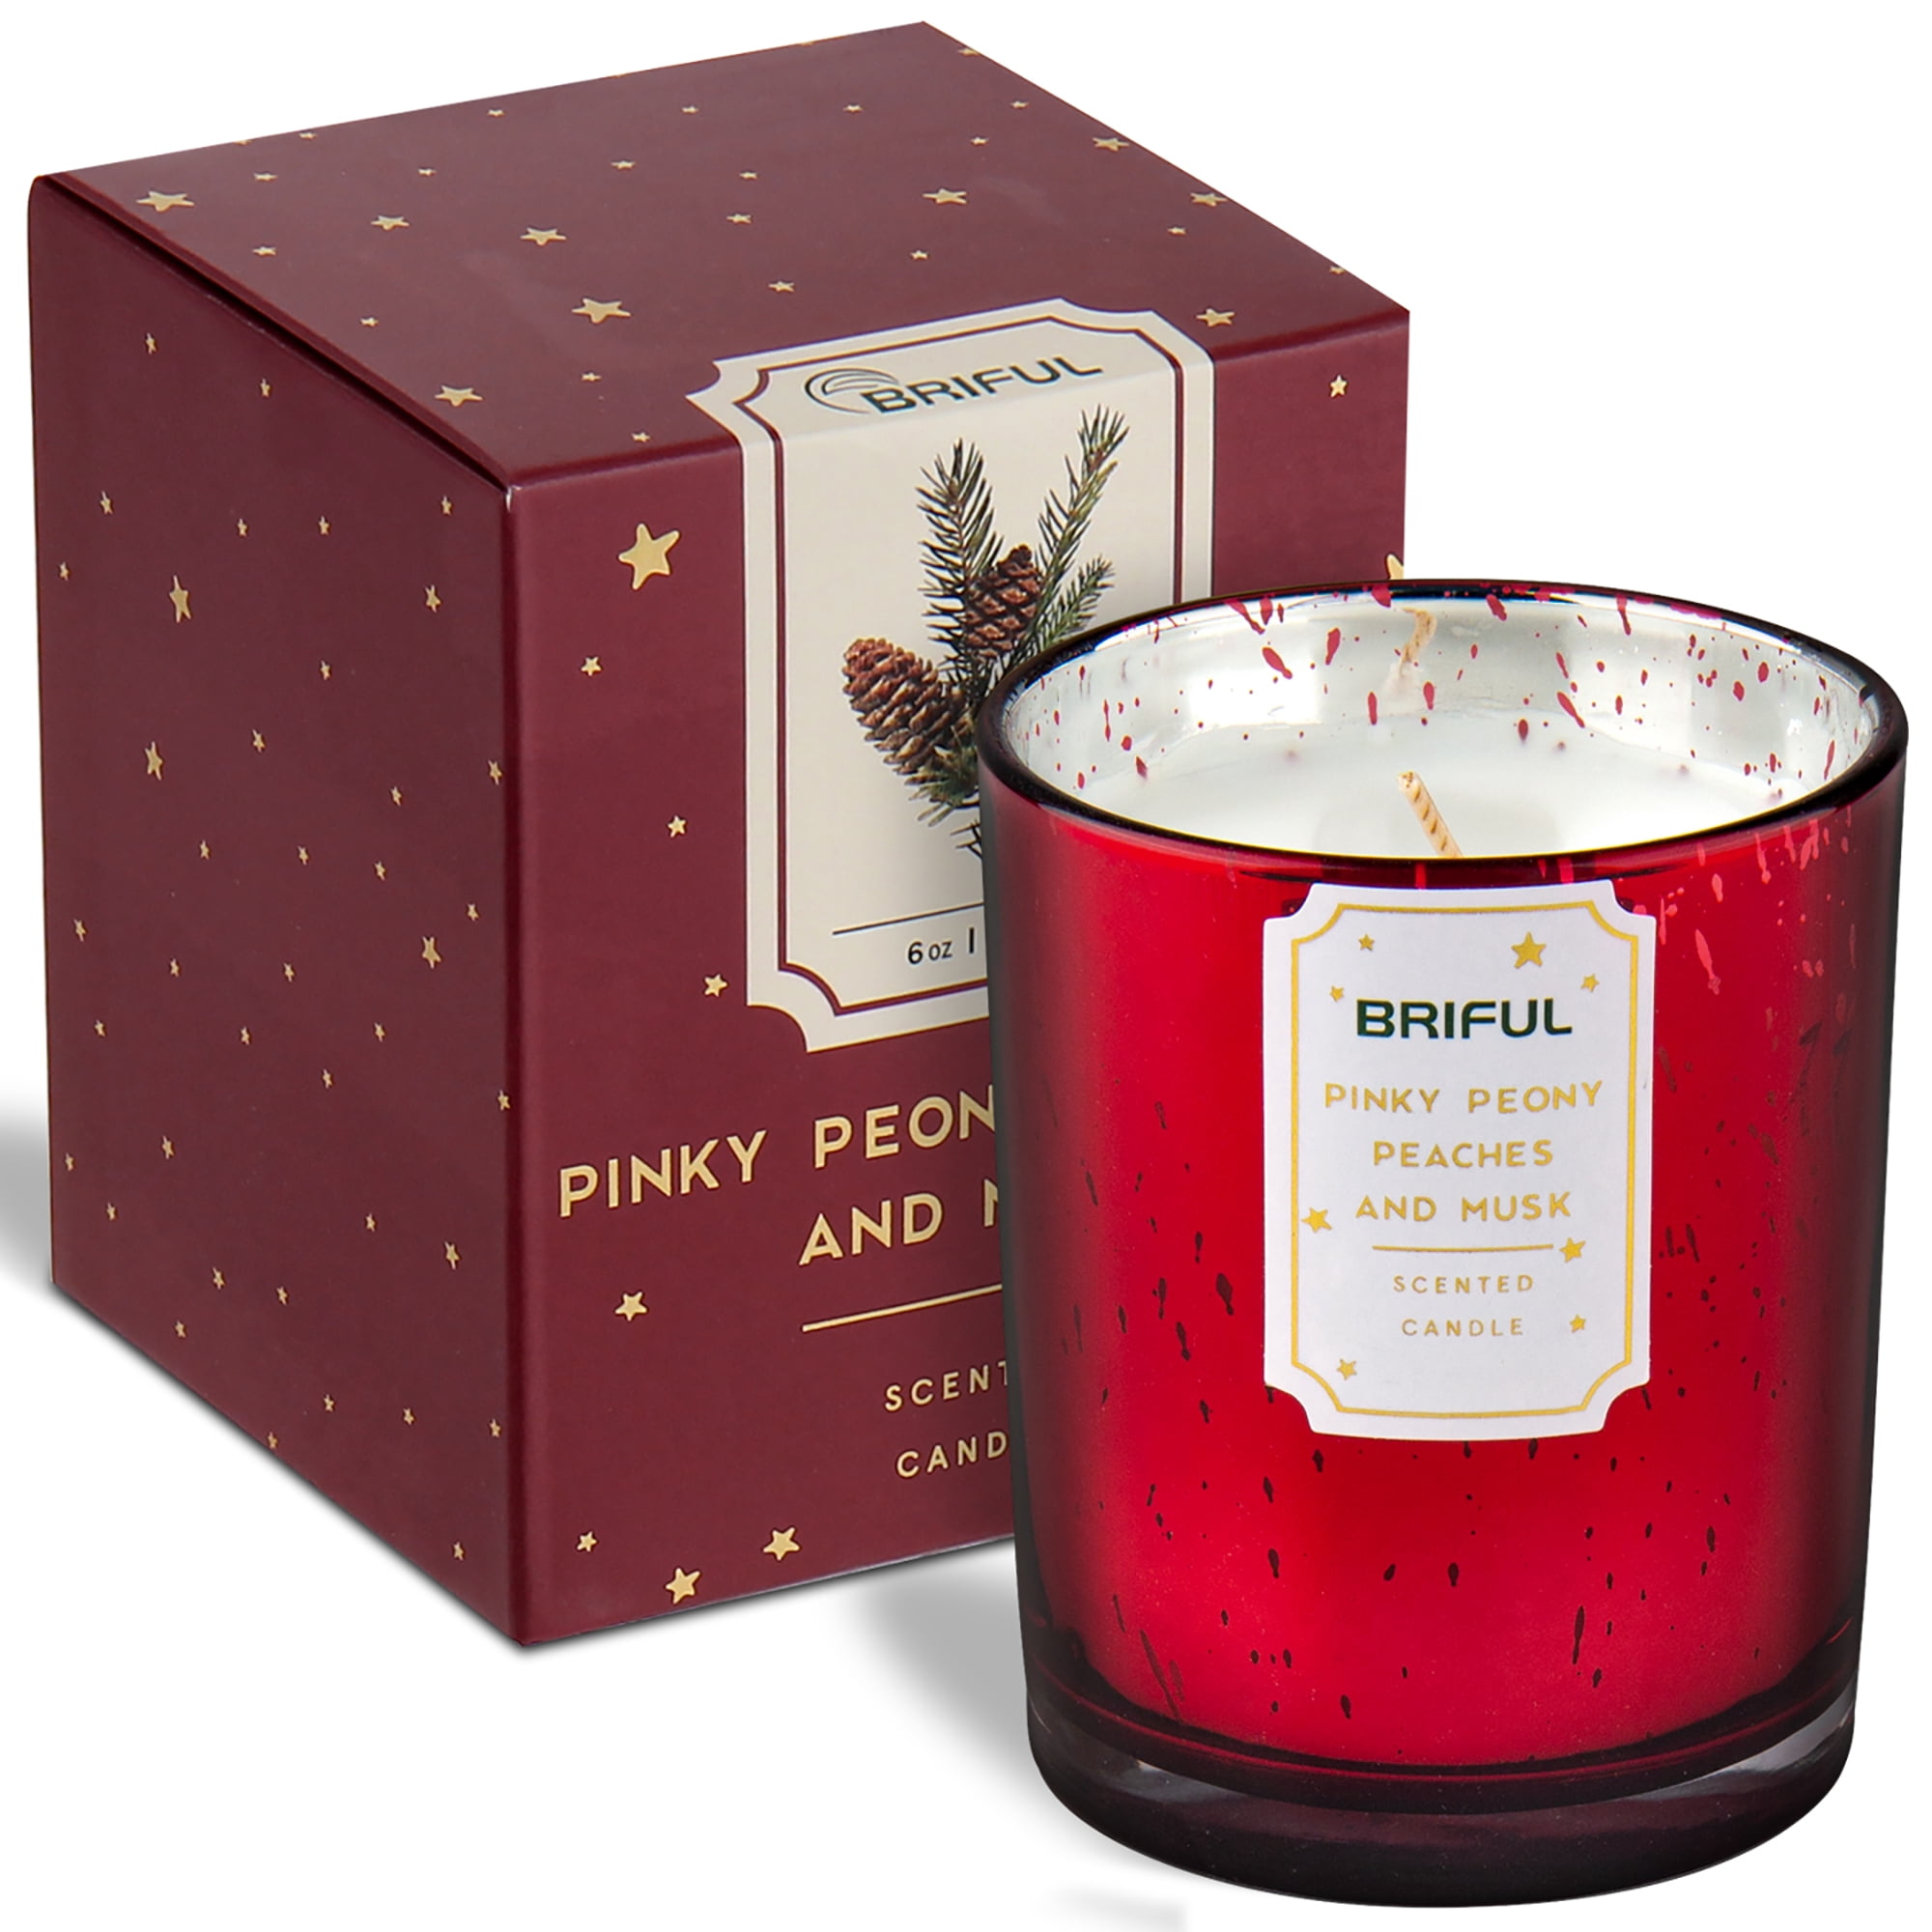 Briful Scented Candles Pine Candle Aromatherapy Soy Candle Jar for Help Relaxing Stress Relief Candles Christmas Gifts Red